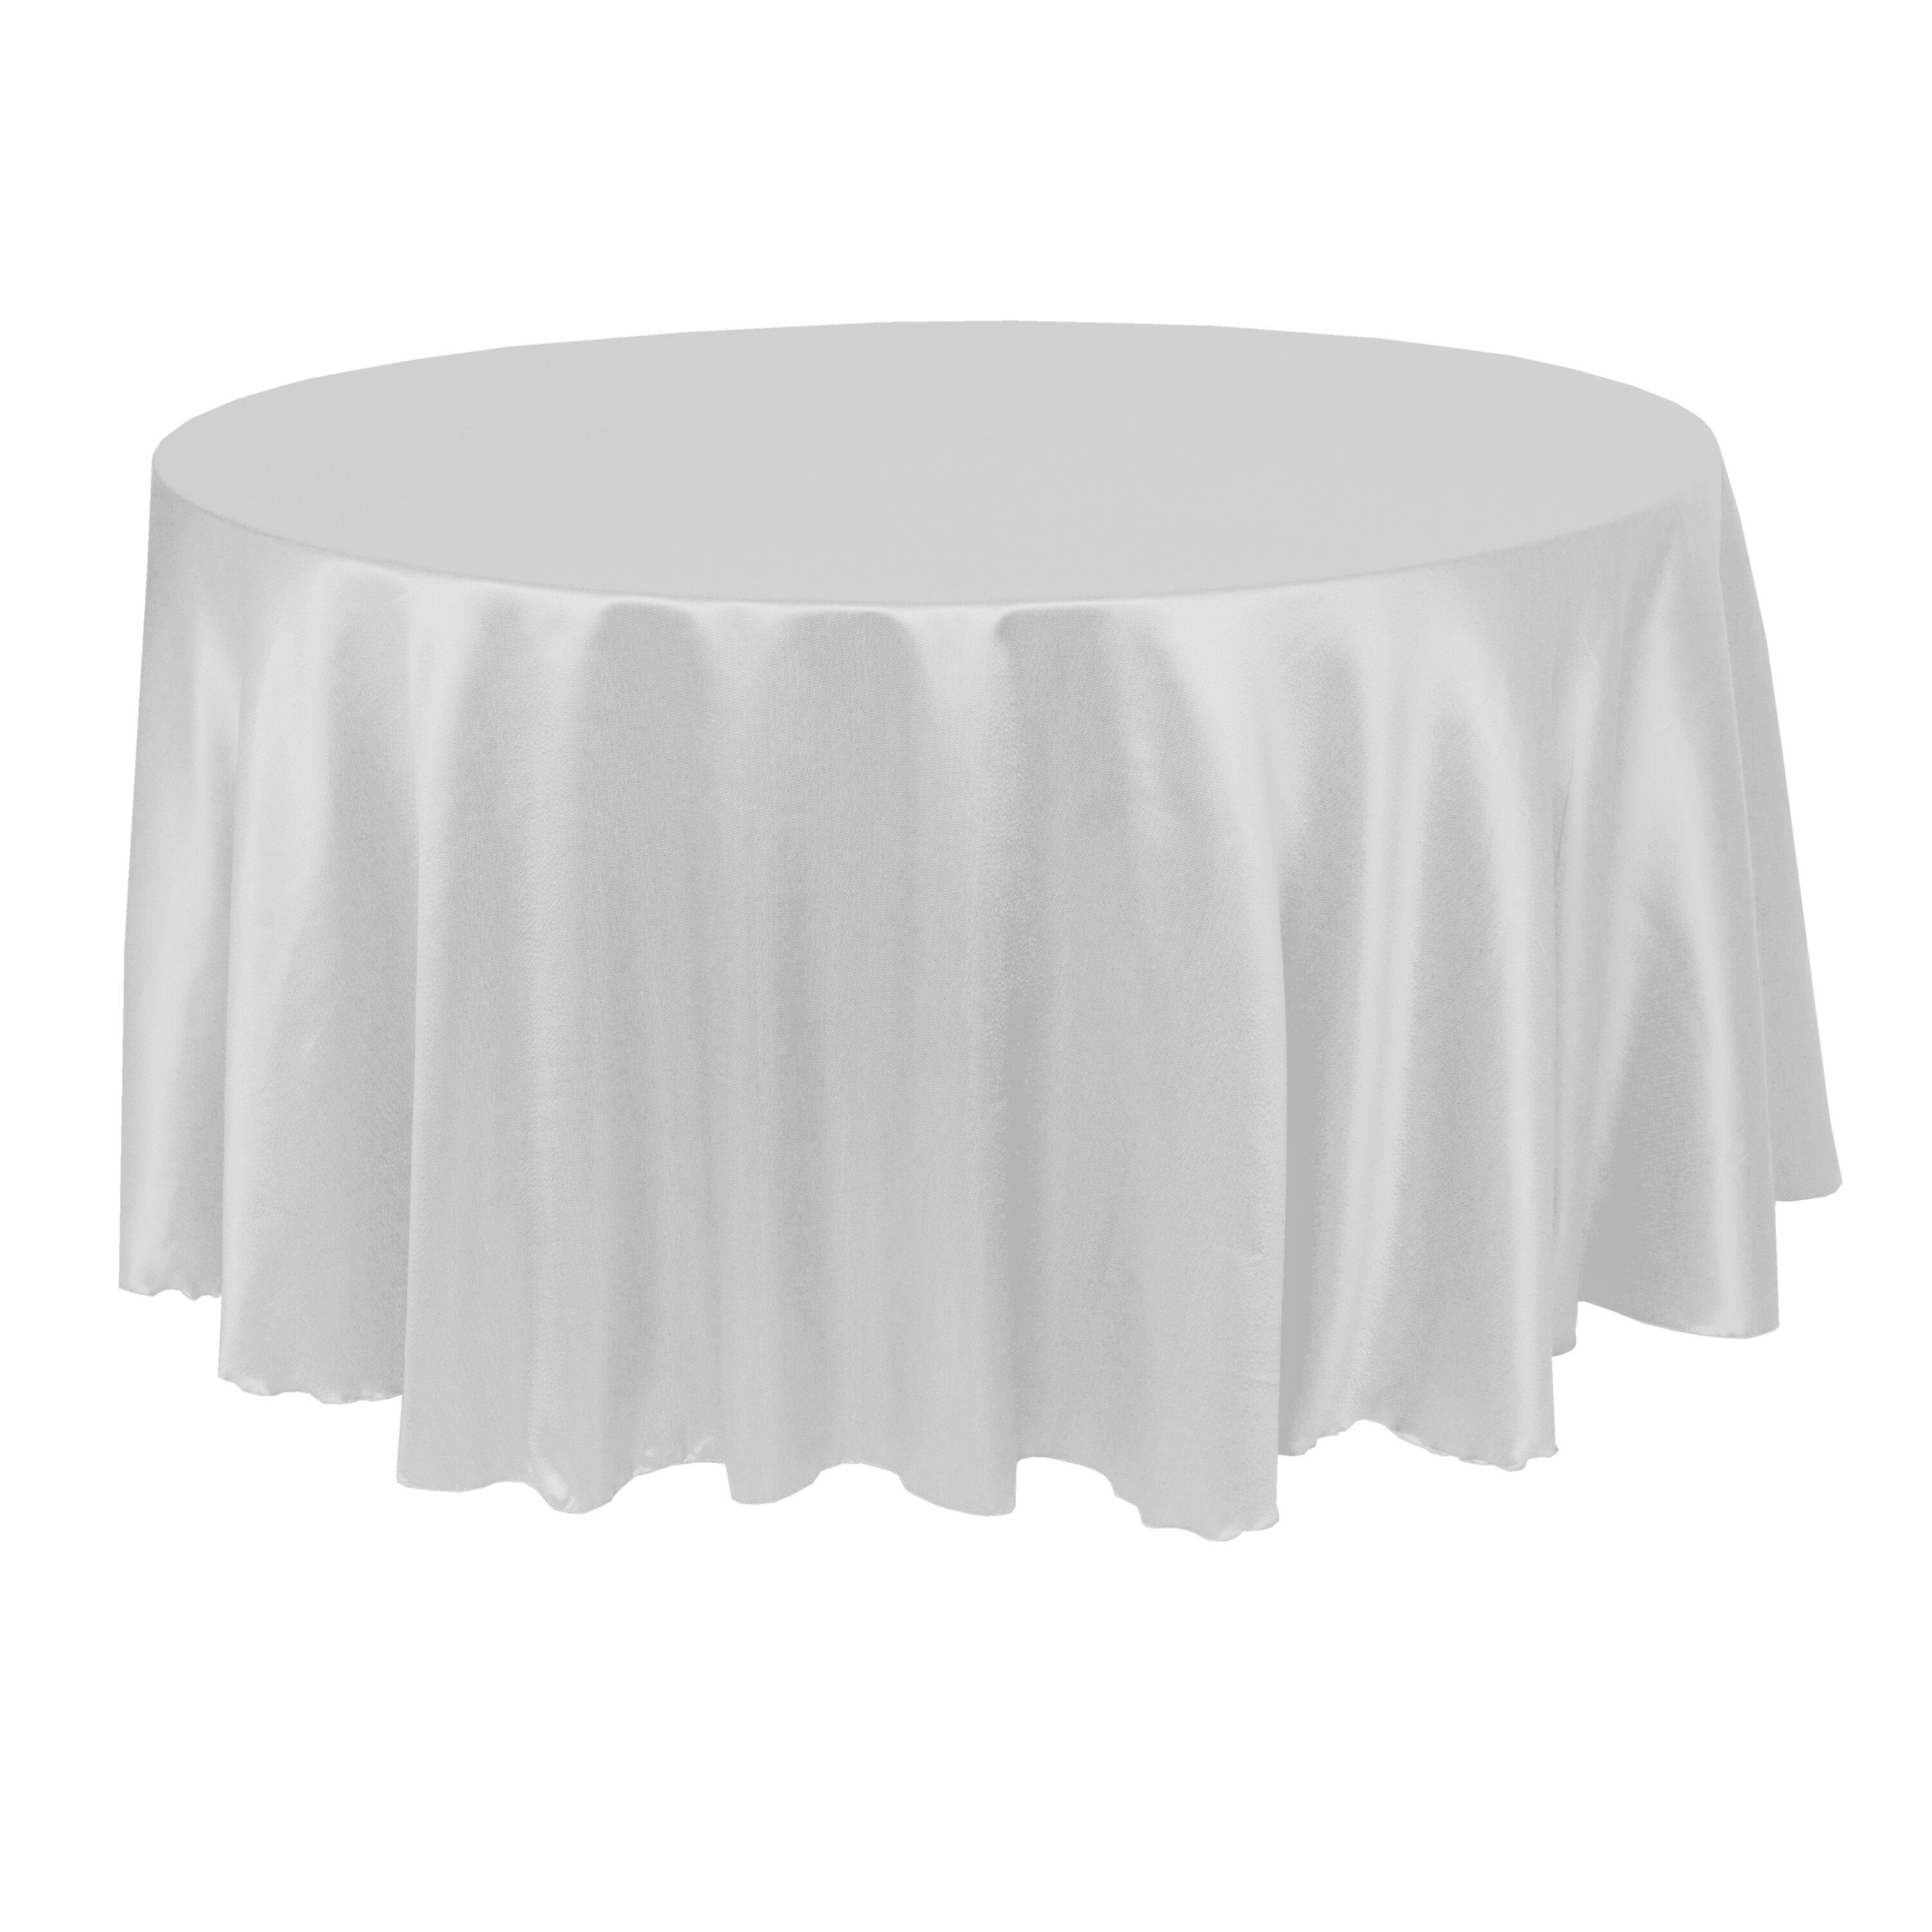 WHITE 20 Pack of 90" Round High Quality Tablecloths 